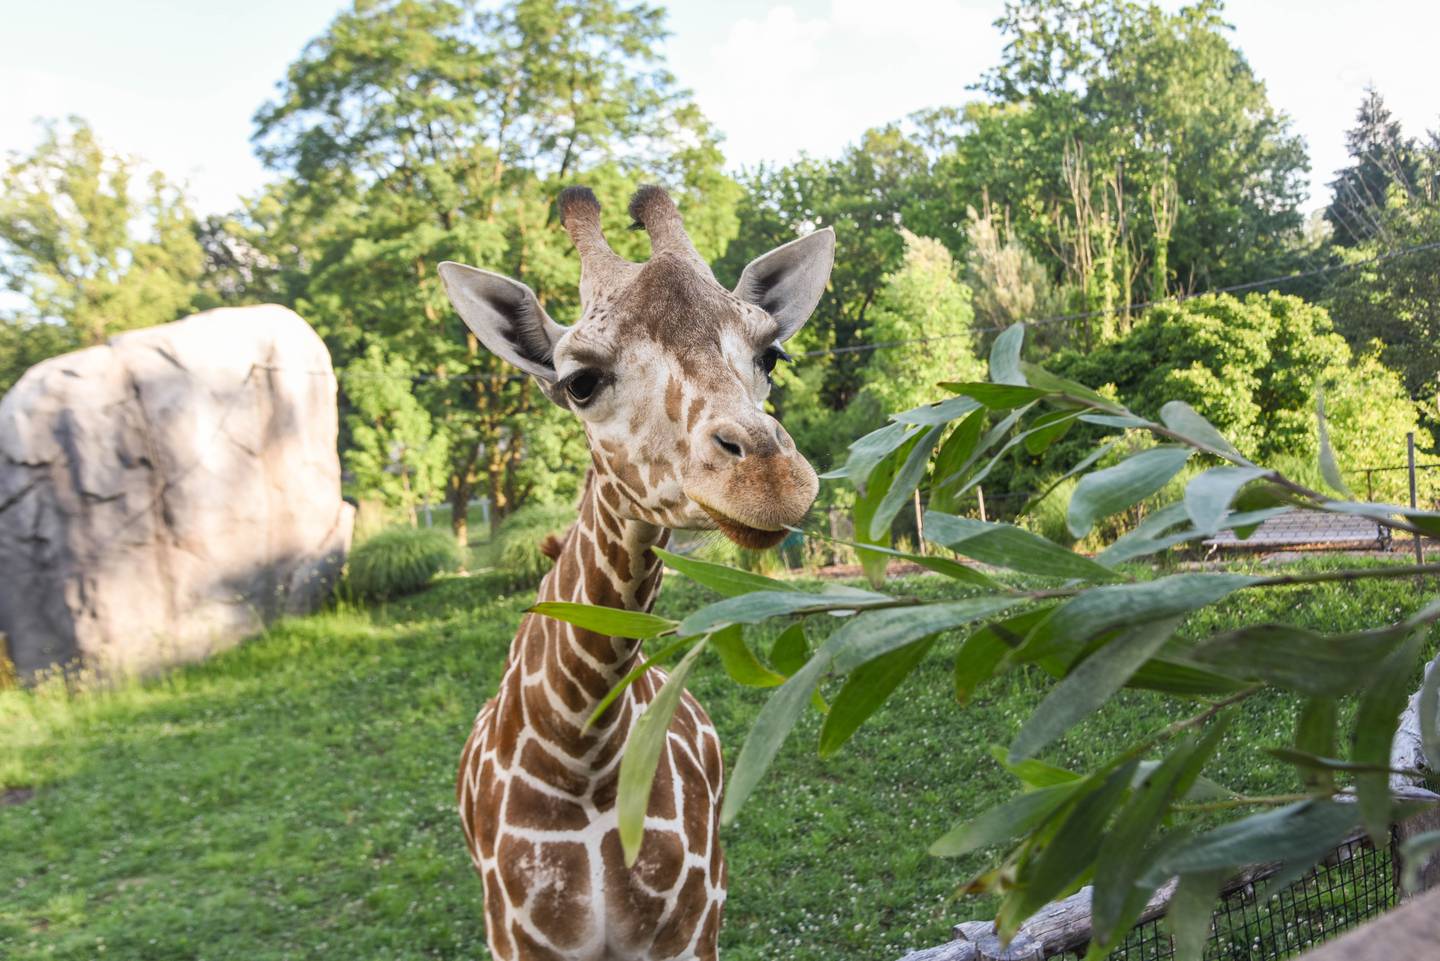 Willow, a reticulated giraffe at the Maryland Zoo in Baltimore, died on Monday.